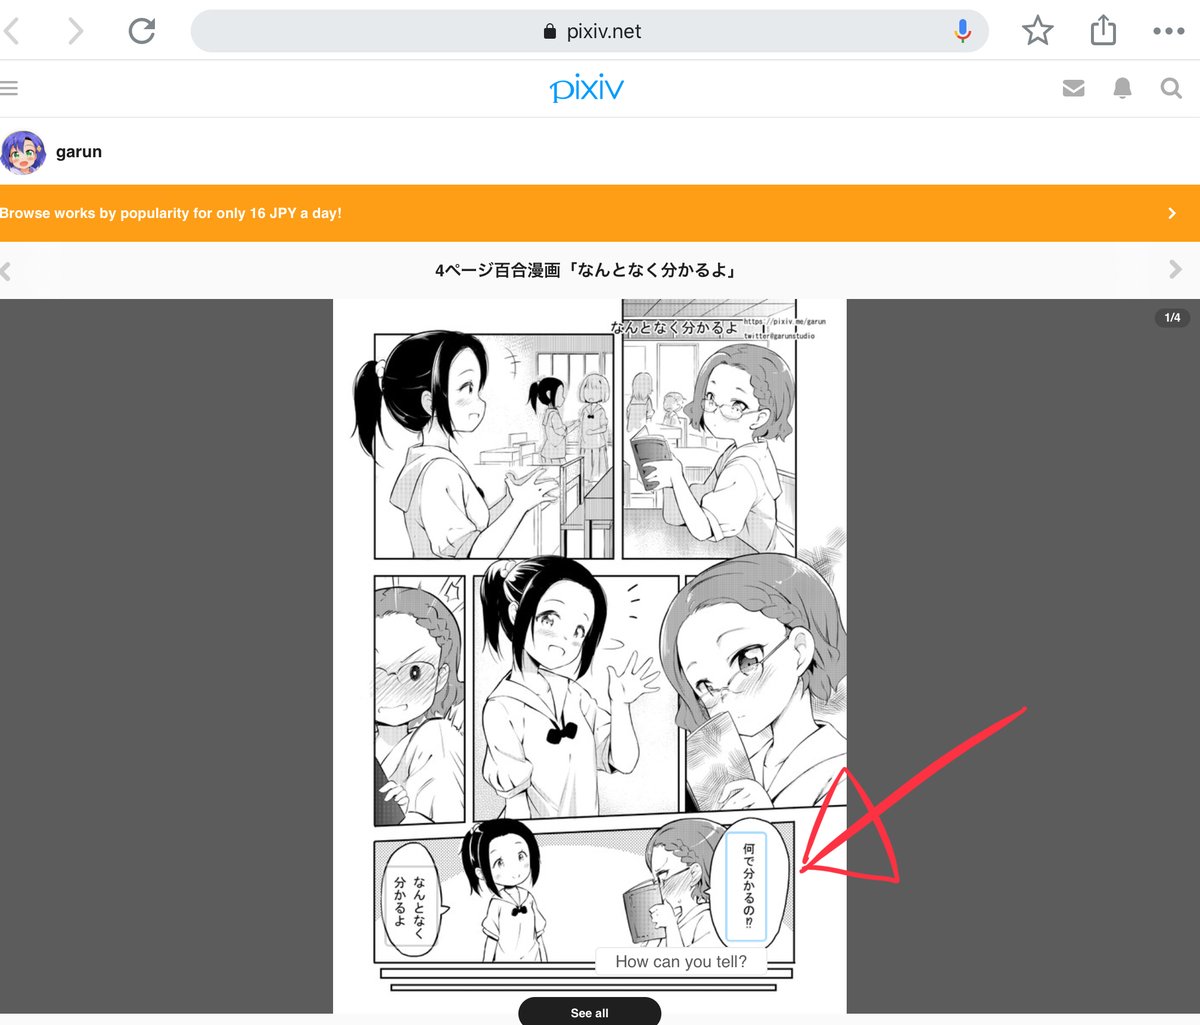 Now Pixiv have trial translate feature
for now,work only mobile browser.
please set english language setting.

Pixiv Development team translate my manga to test this feature
please feel free to read ^ ^
https://t.co/3sfcPcI5Hd

if you like this feature please answer
Questionnaire 